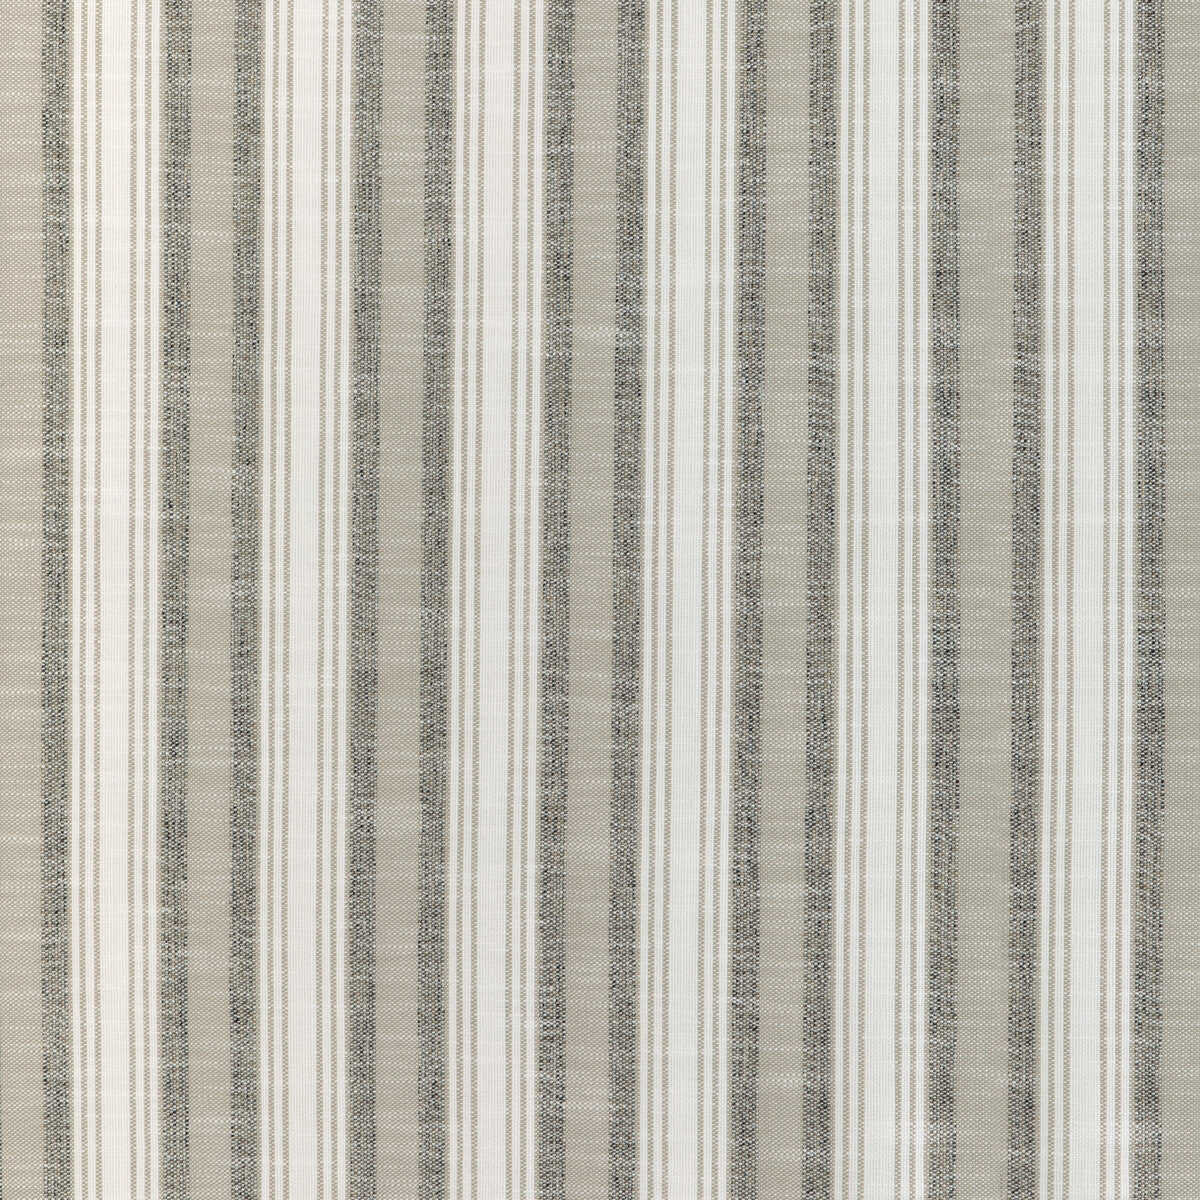 Sims Stripe fabric in cafe color - pattern 37046.11.0 - by Kravet Design in the Thom Filicia Latitude collection